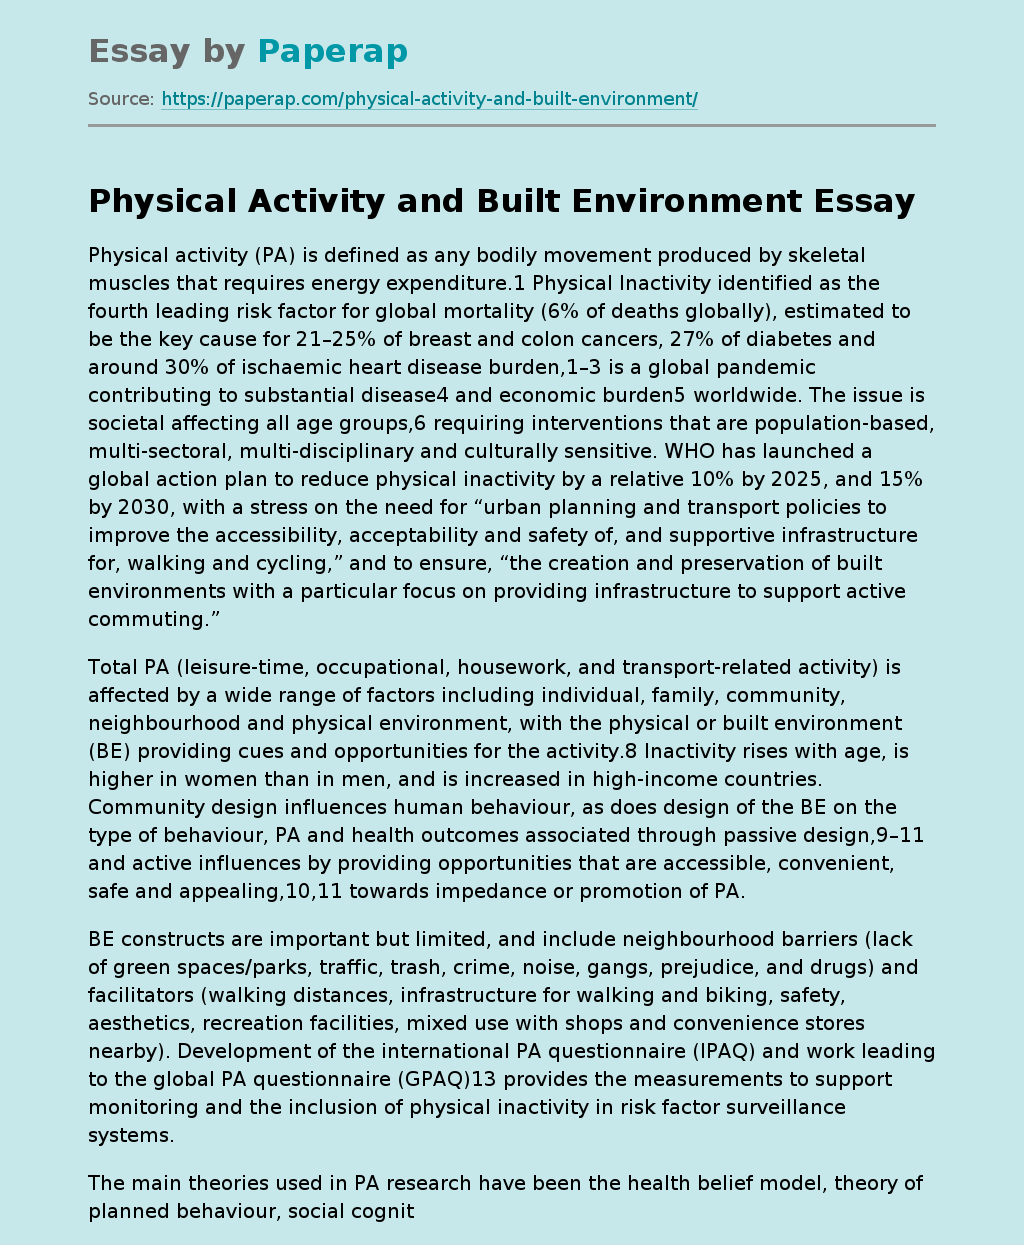 Physical Activity and Built Environment